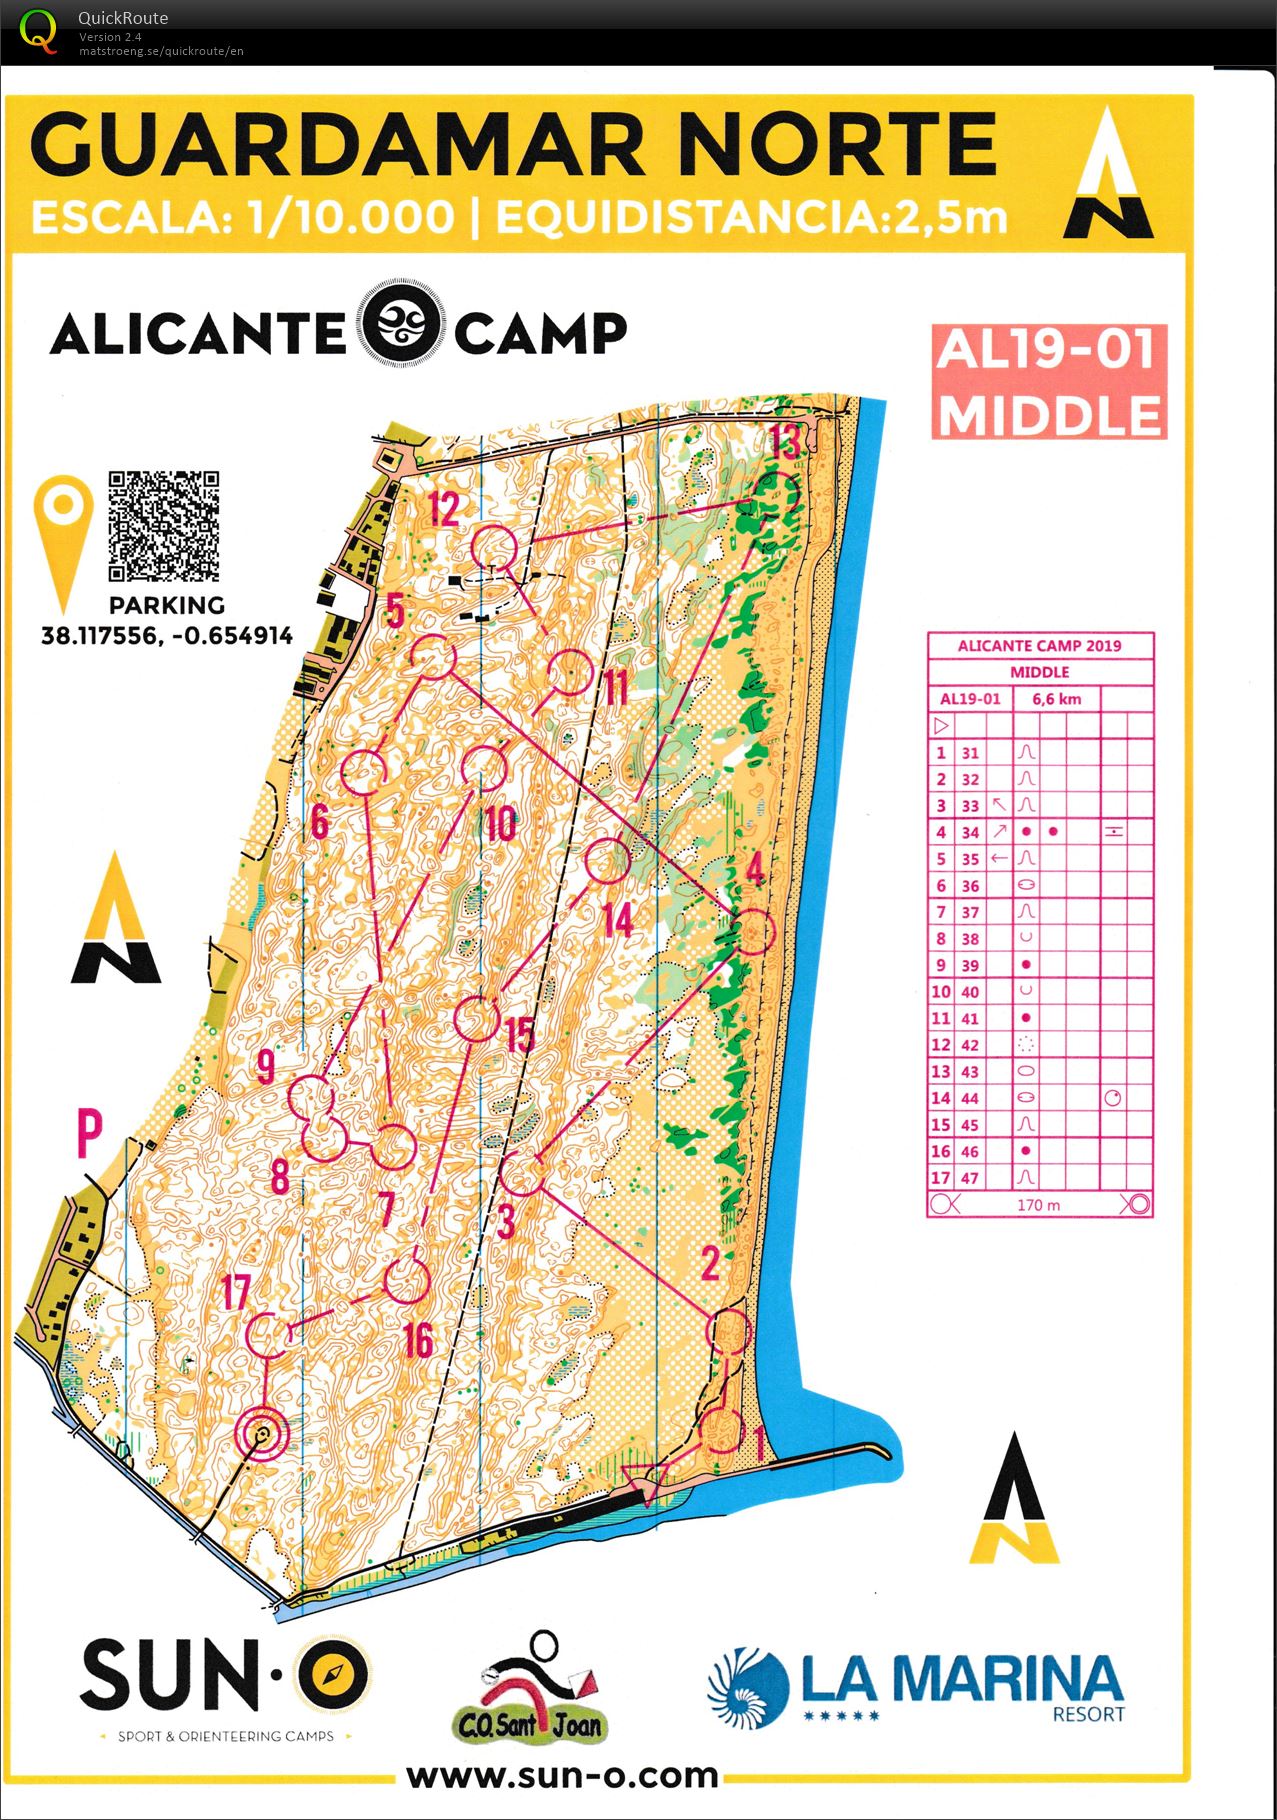 TC Alicante #7, middle rychle (23.01.2019)